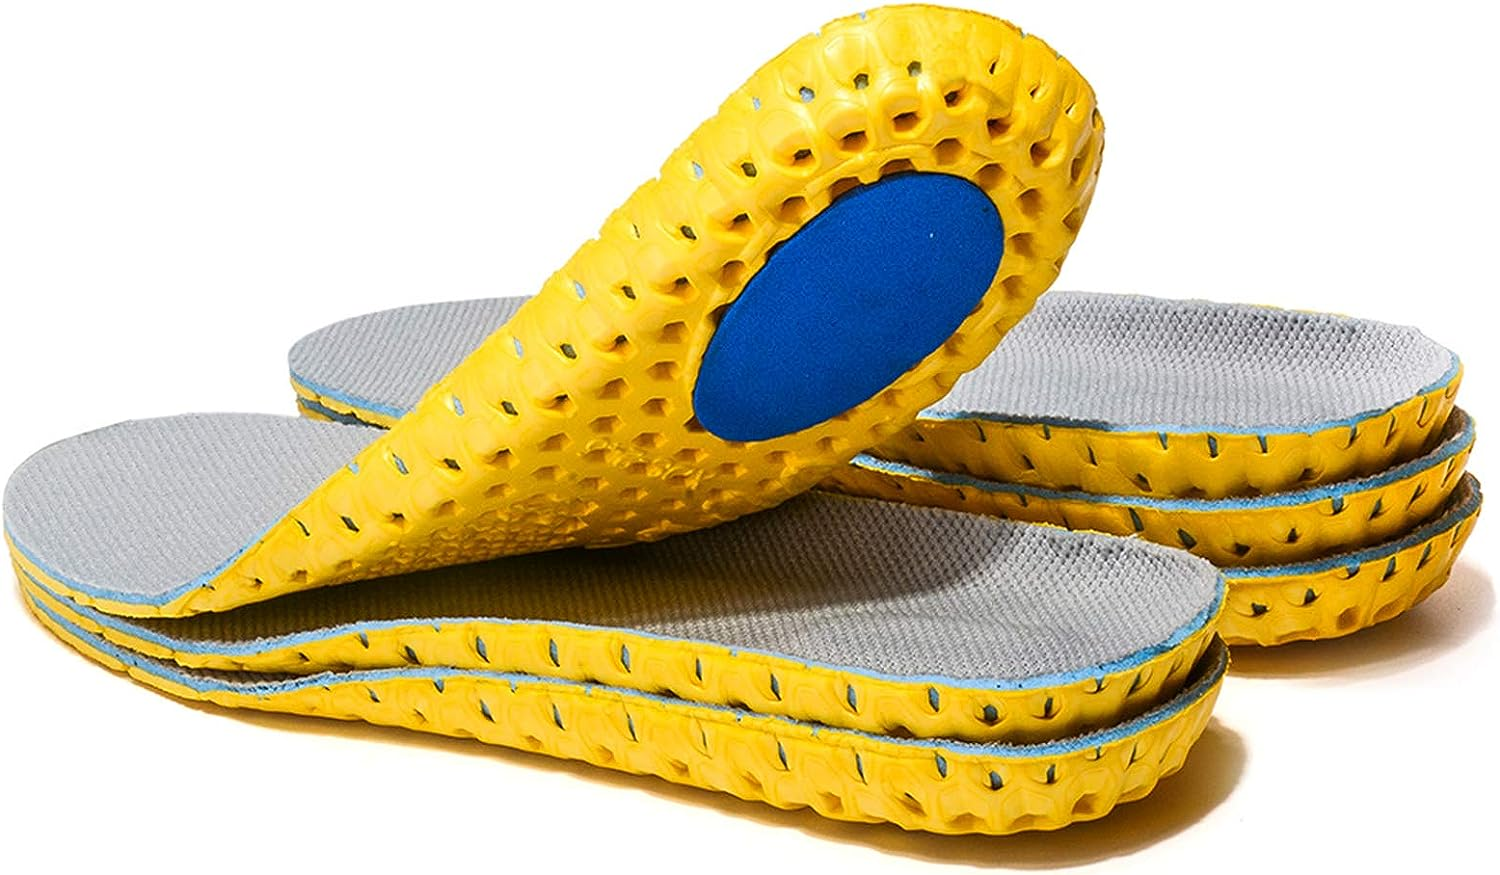 Best Puma Insoles Replacements (My 5 Top Picks of 2023)